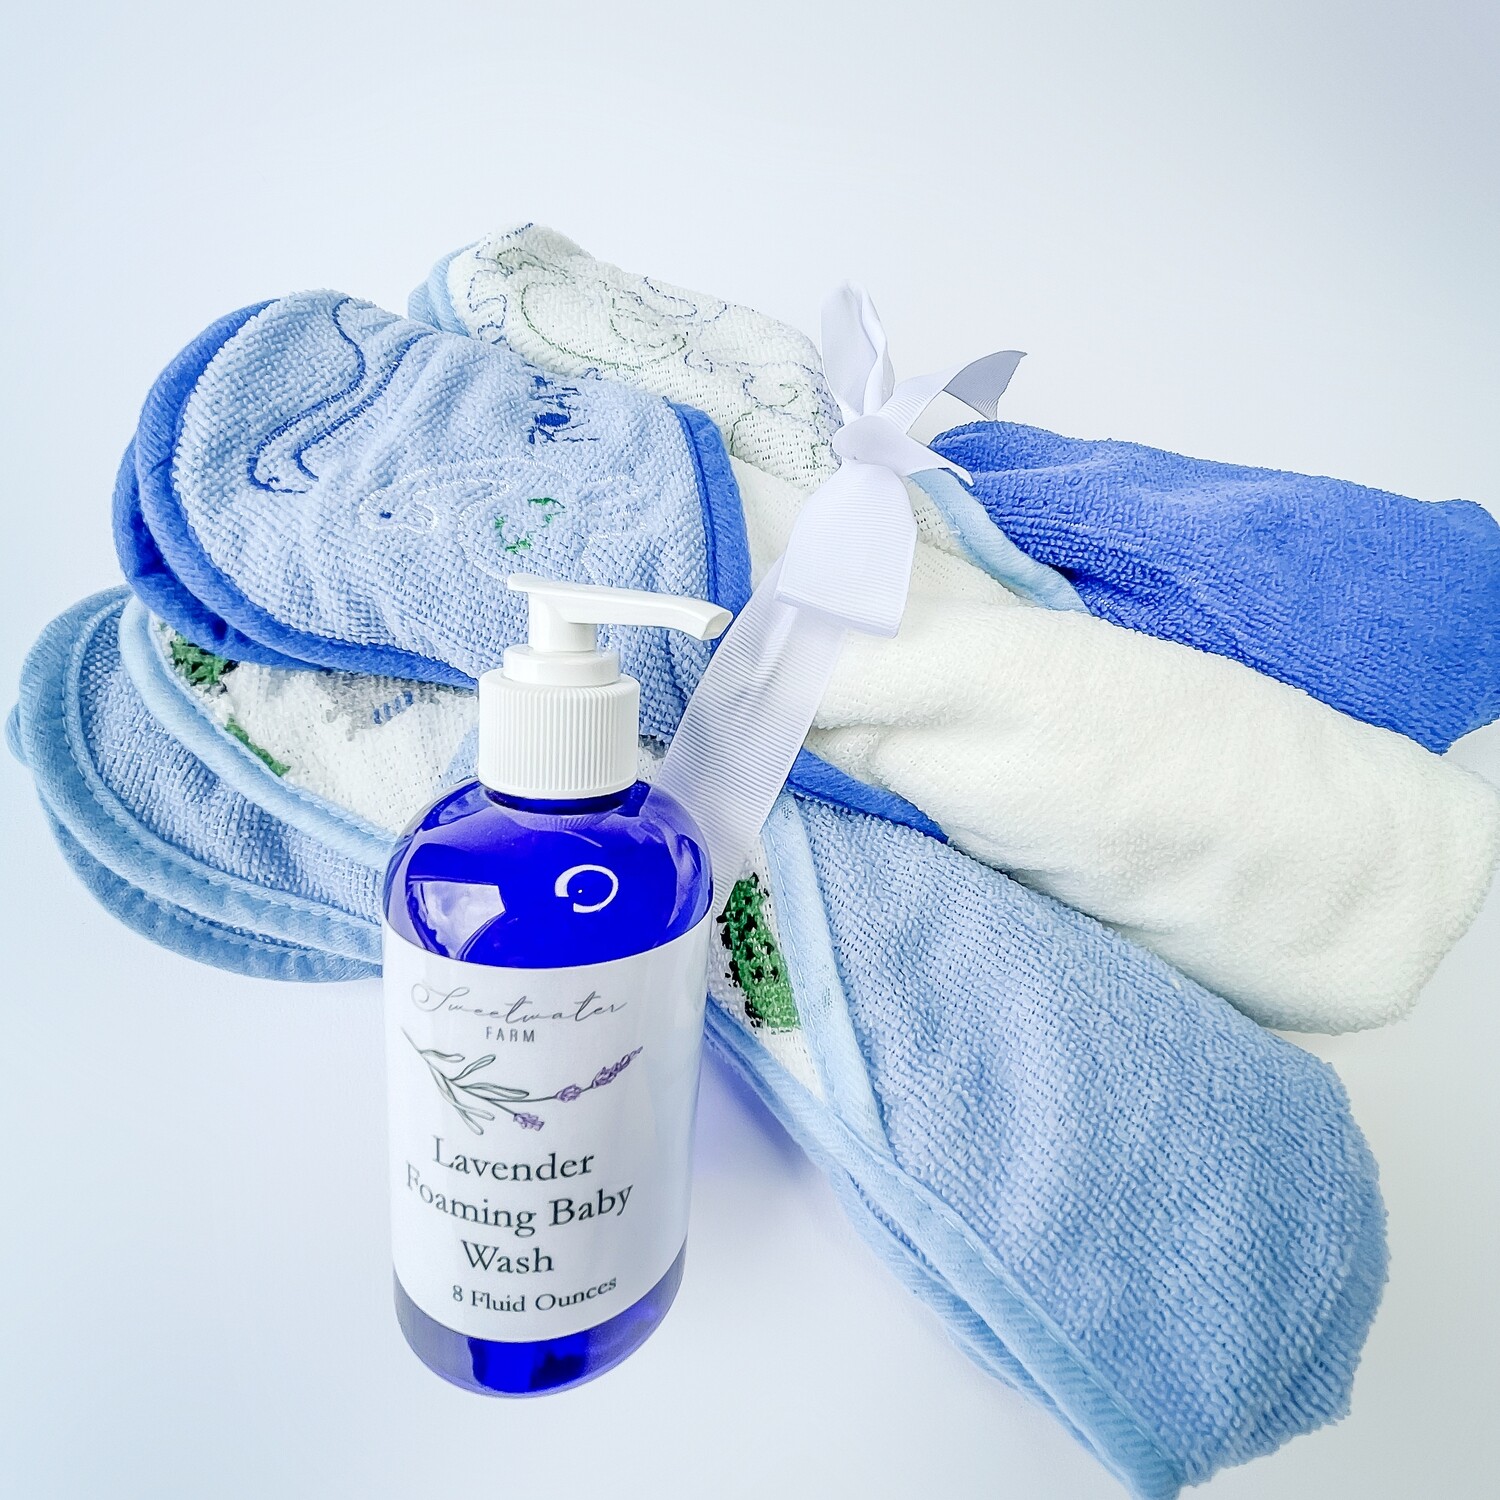 Hooded Baby Towel and Lavender Foaming Baby Wash Gift Set